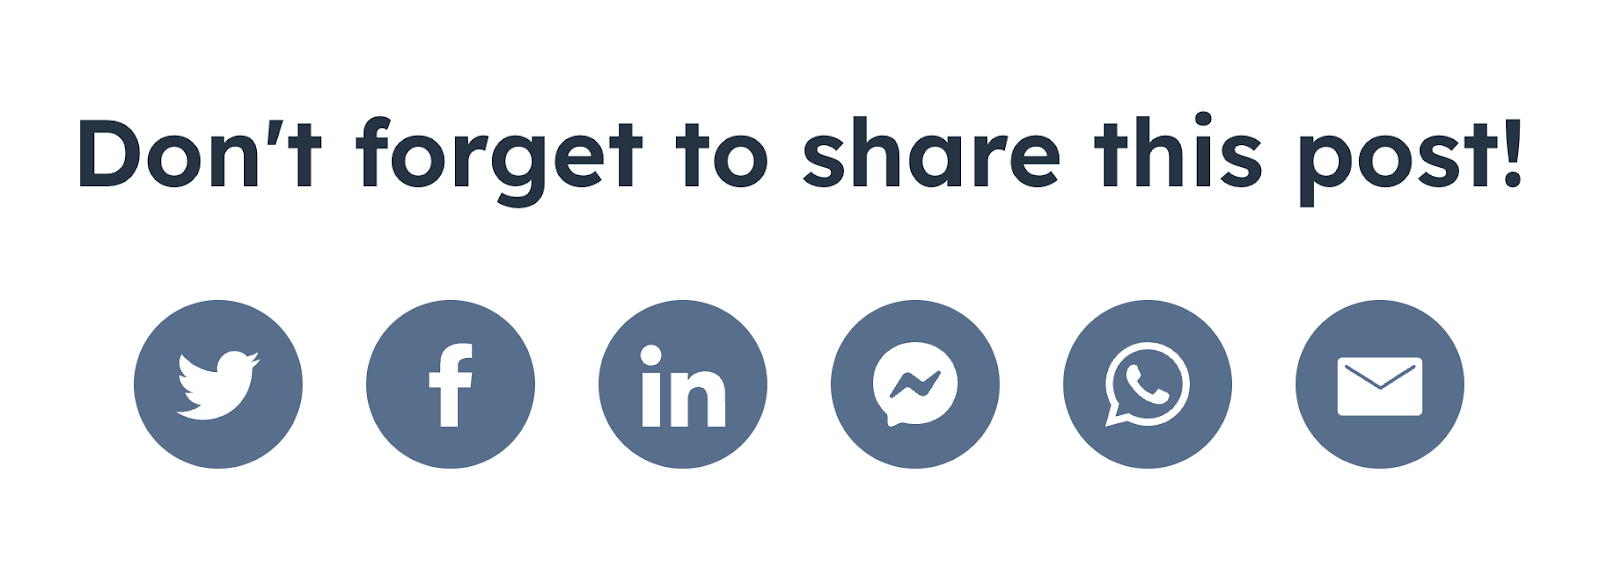 "Don't forget to share this post!" CTA at the bottom of HubSpot's blog post